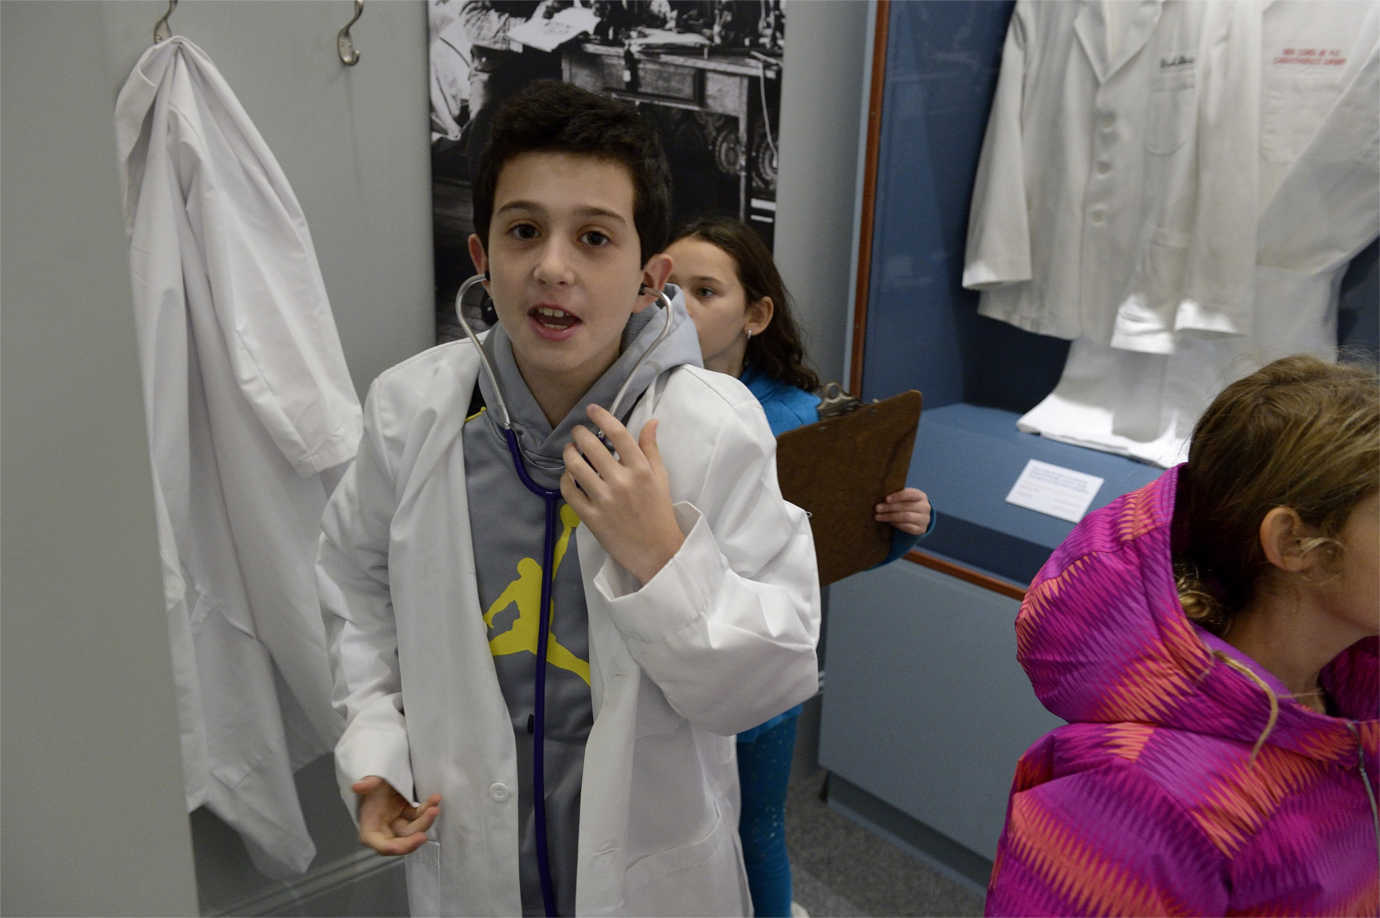 Students explore an interactive exhibit in *Beyond Chicken Soup* at the Jewish Museum of Maryland. Image courtesy of the Jewish Museum of Maryland.